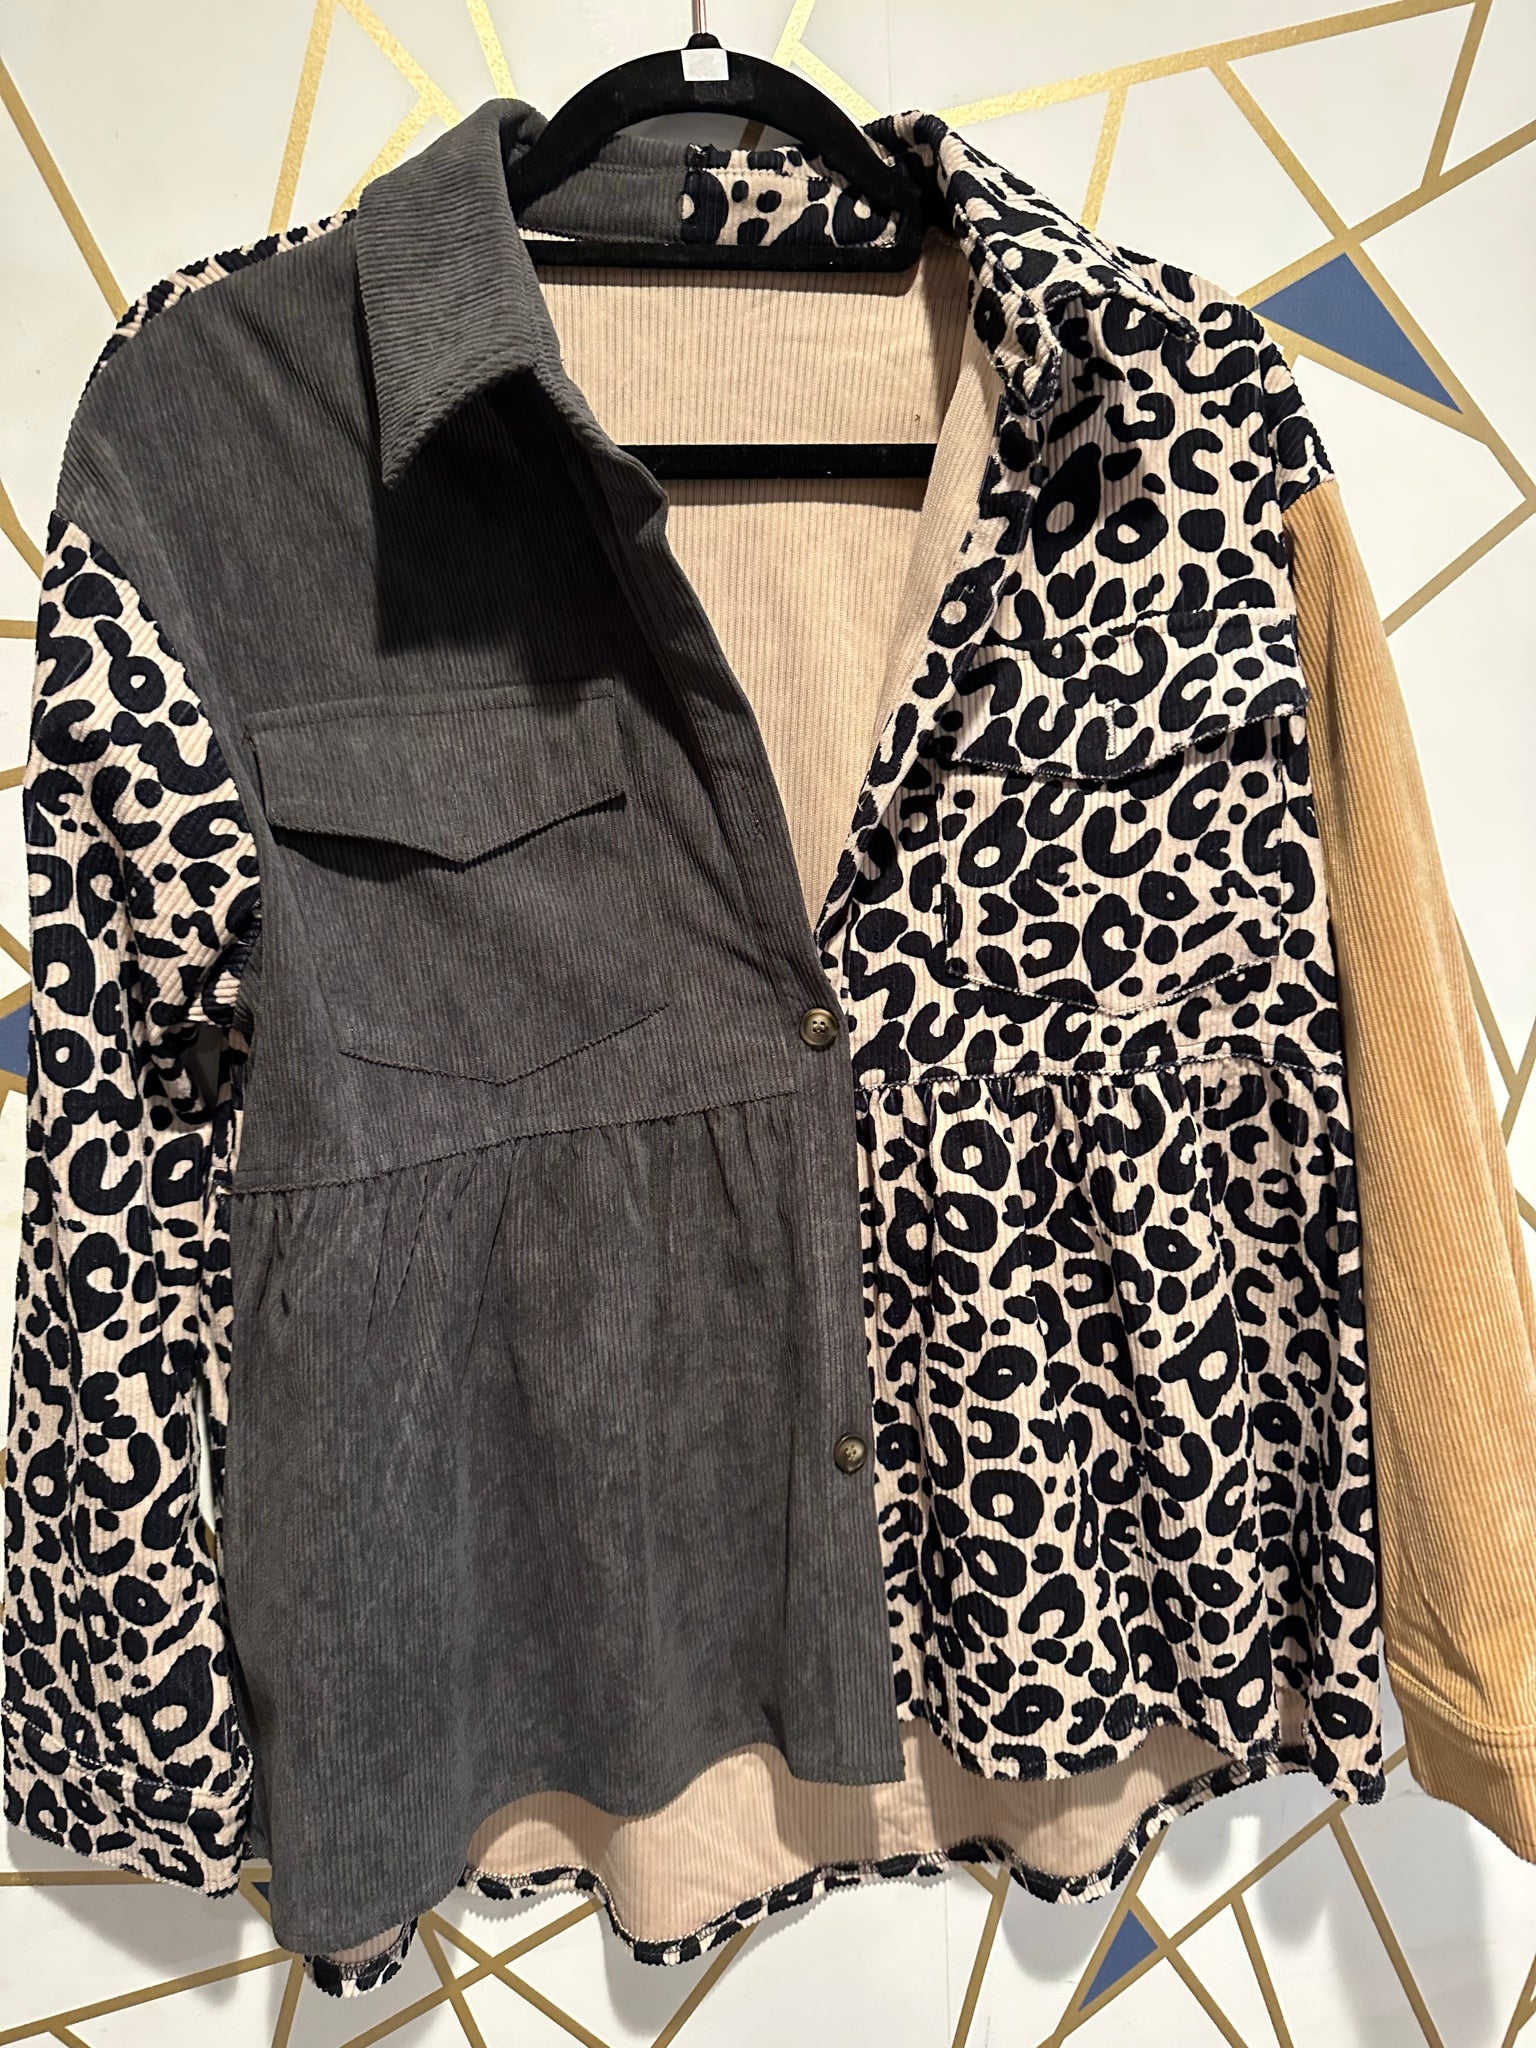 Grey corduroy jacket with leopard arms